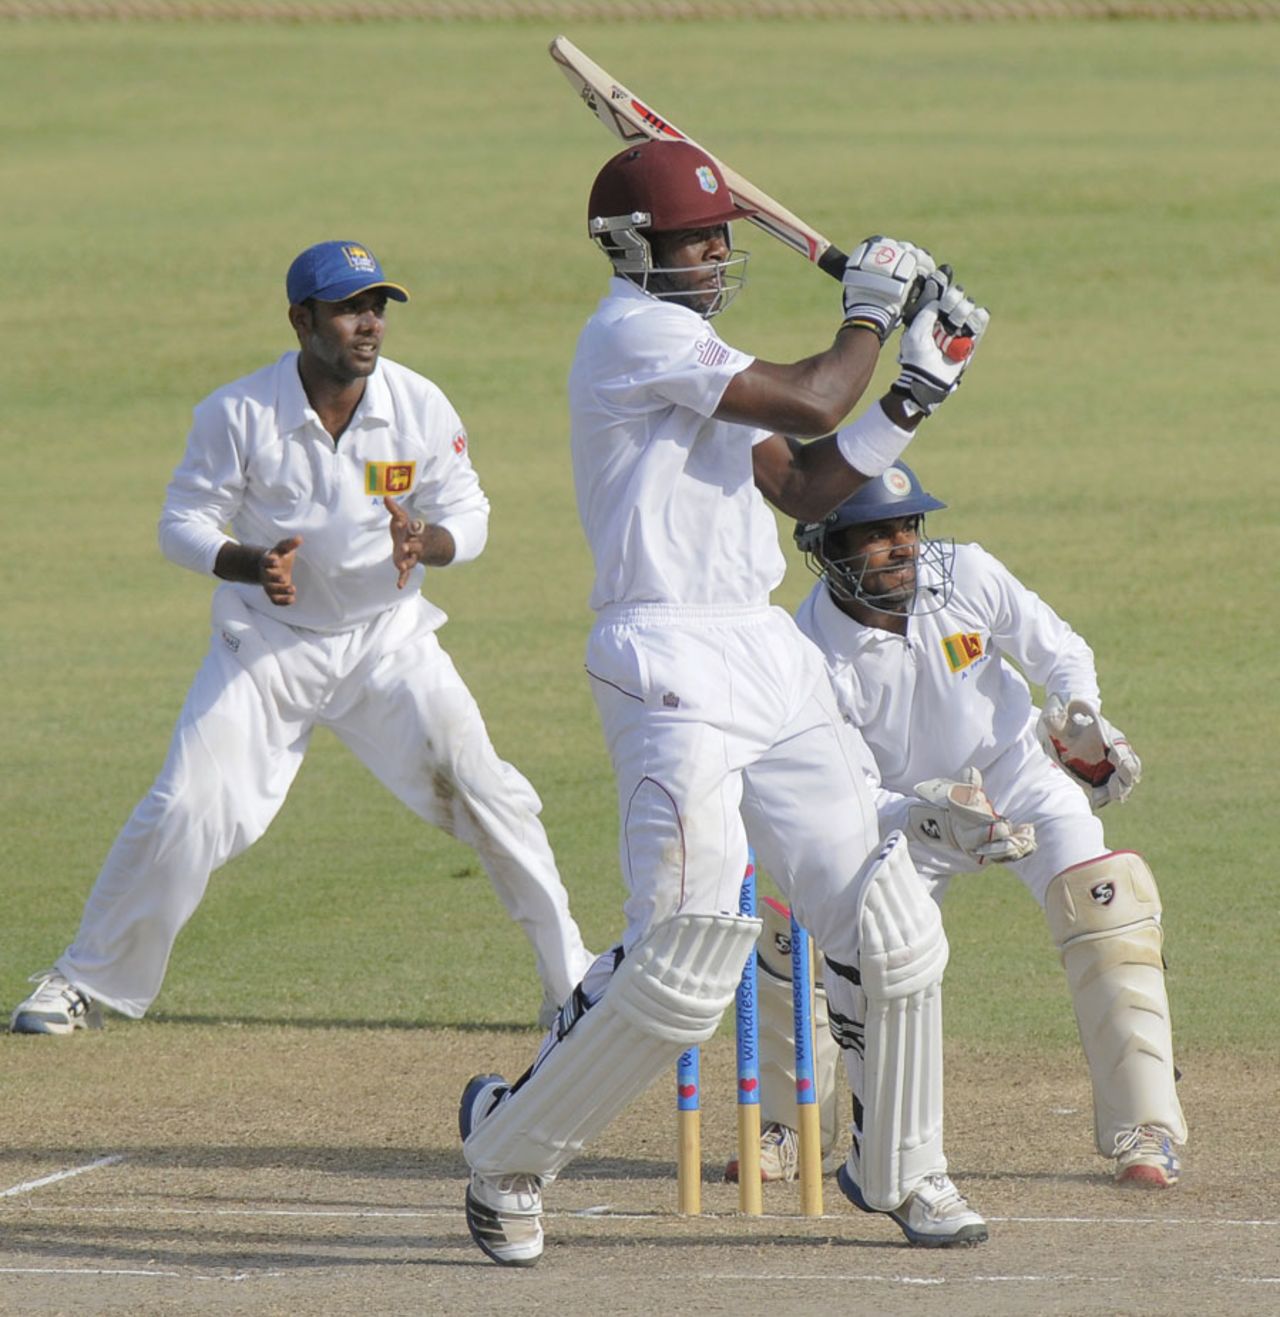 Kirk Edwards plays a pull shot, West Indies A v Sri Lanka A, 1st unofficial Test, 2nd day, St Kitts, June 6, 2013